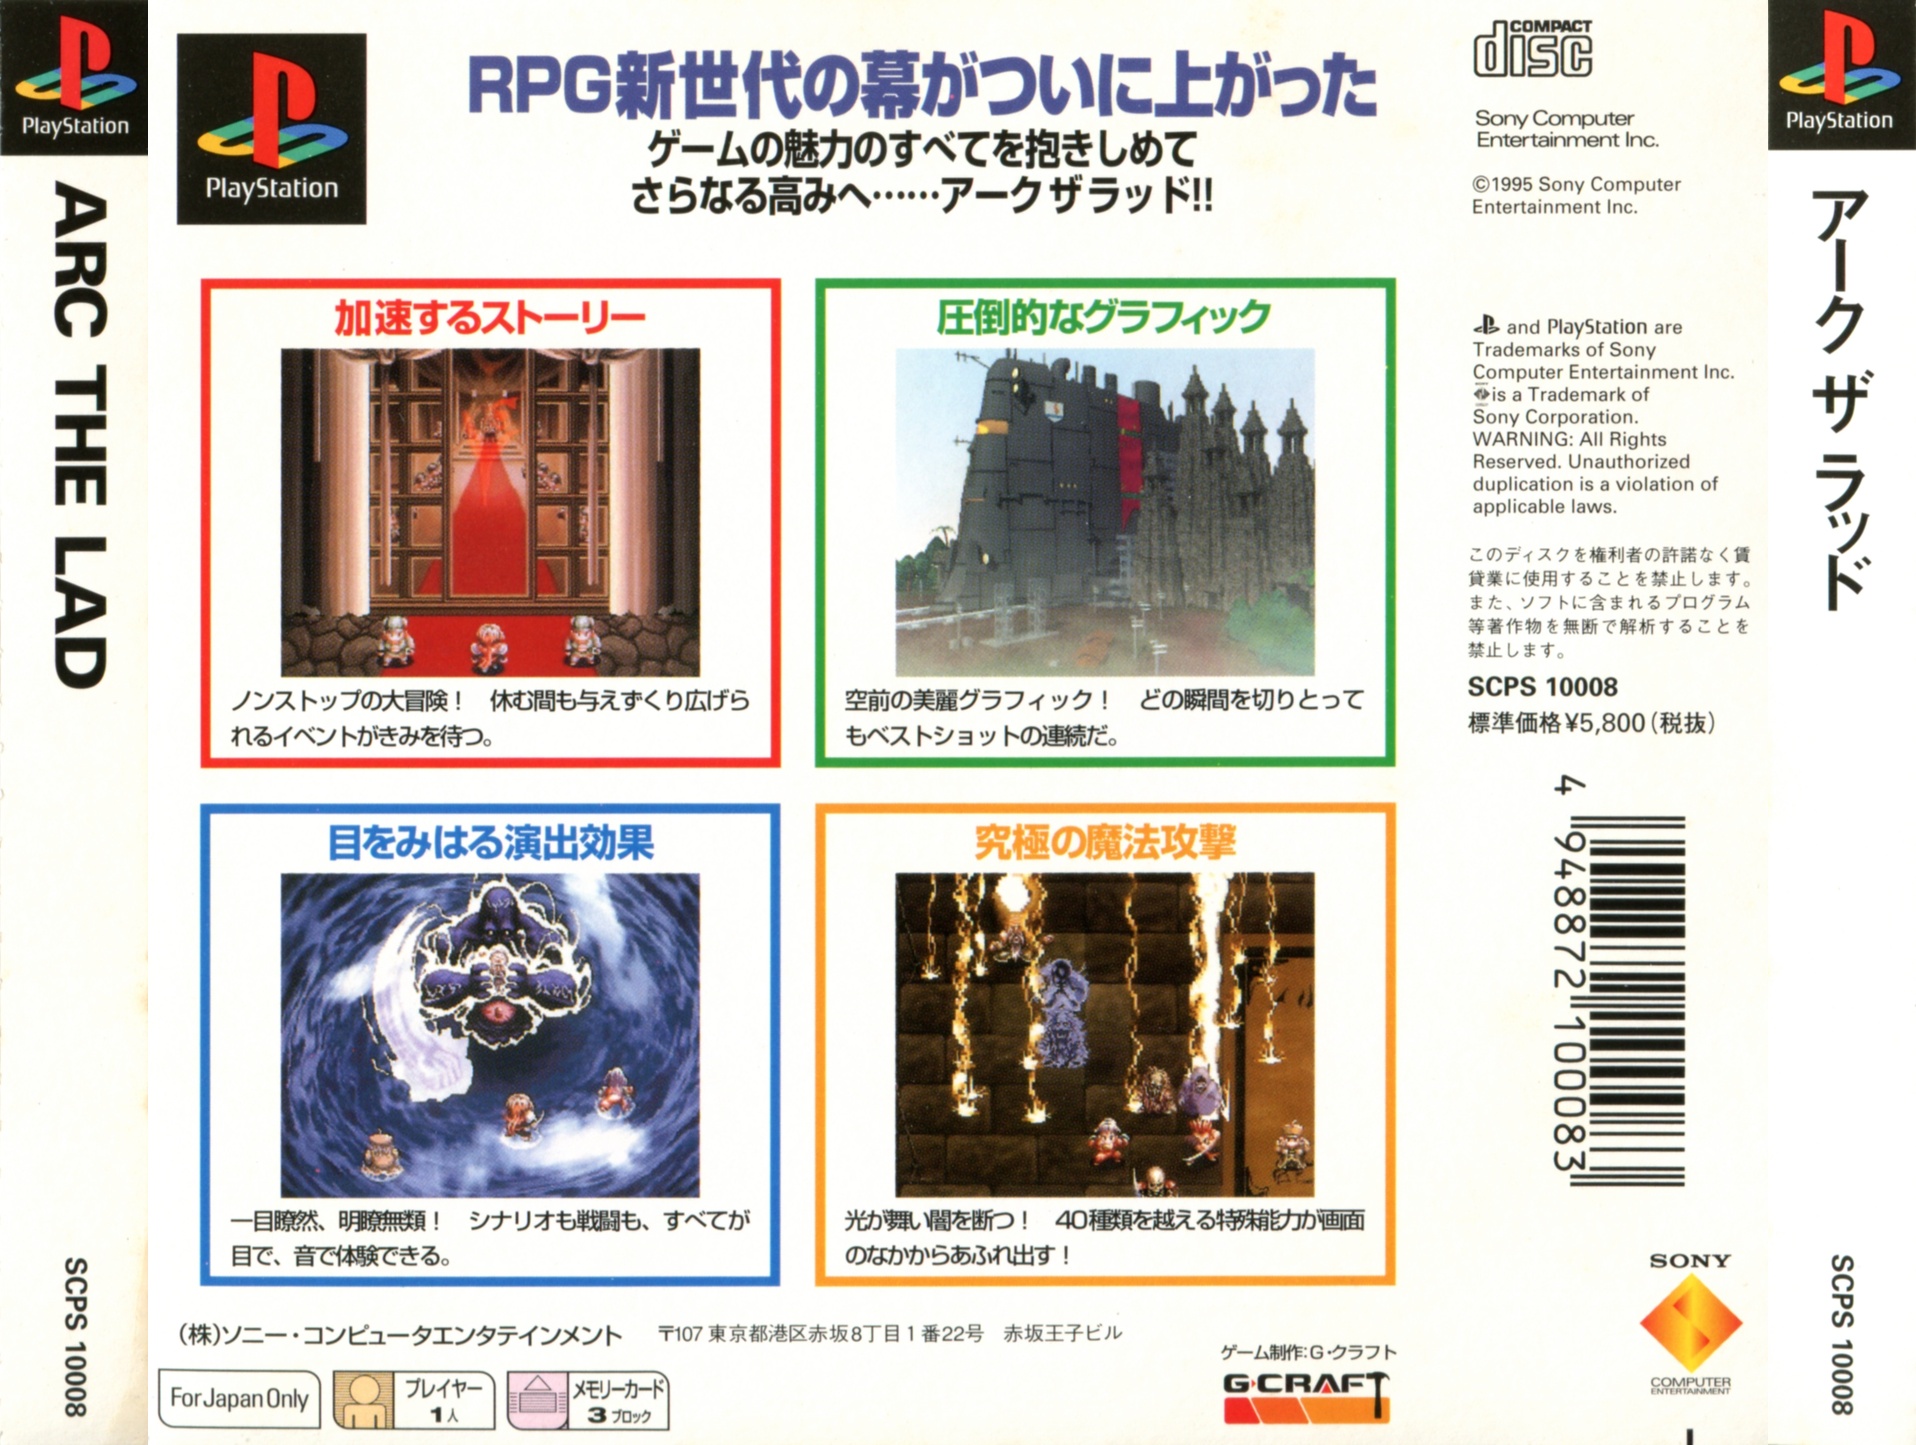 Arc the Lad PSX cover